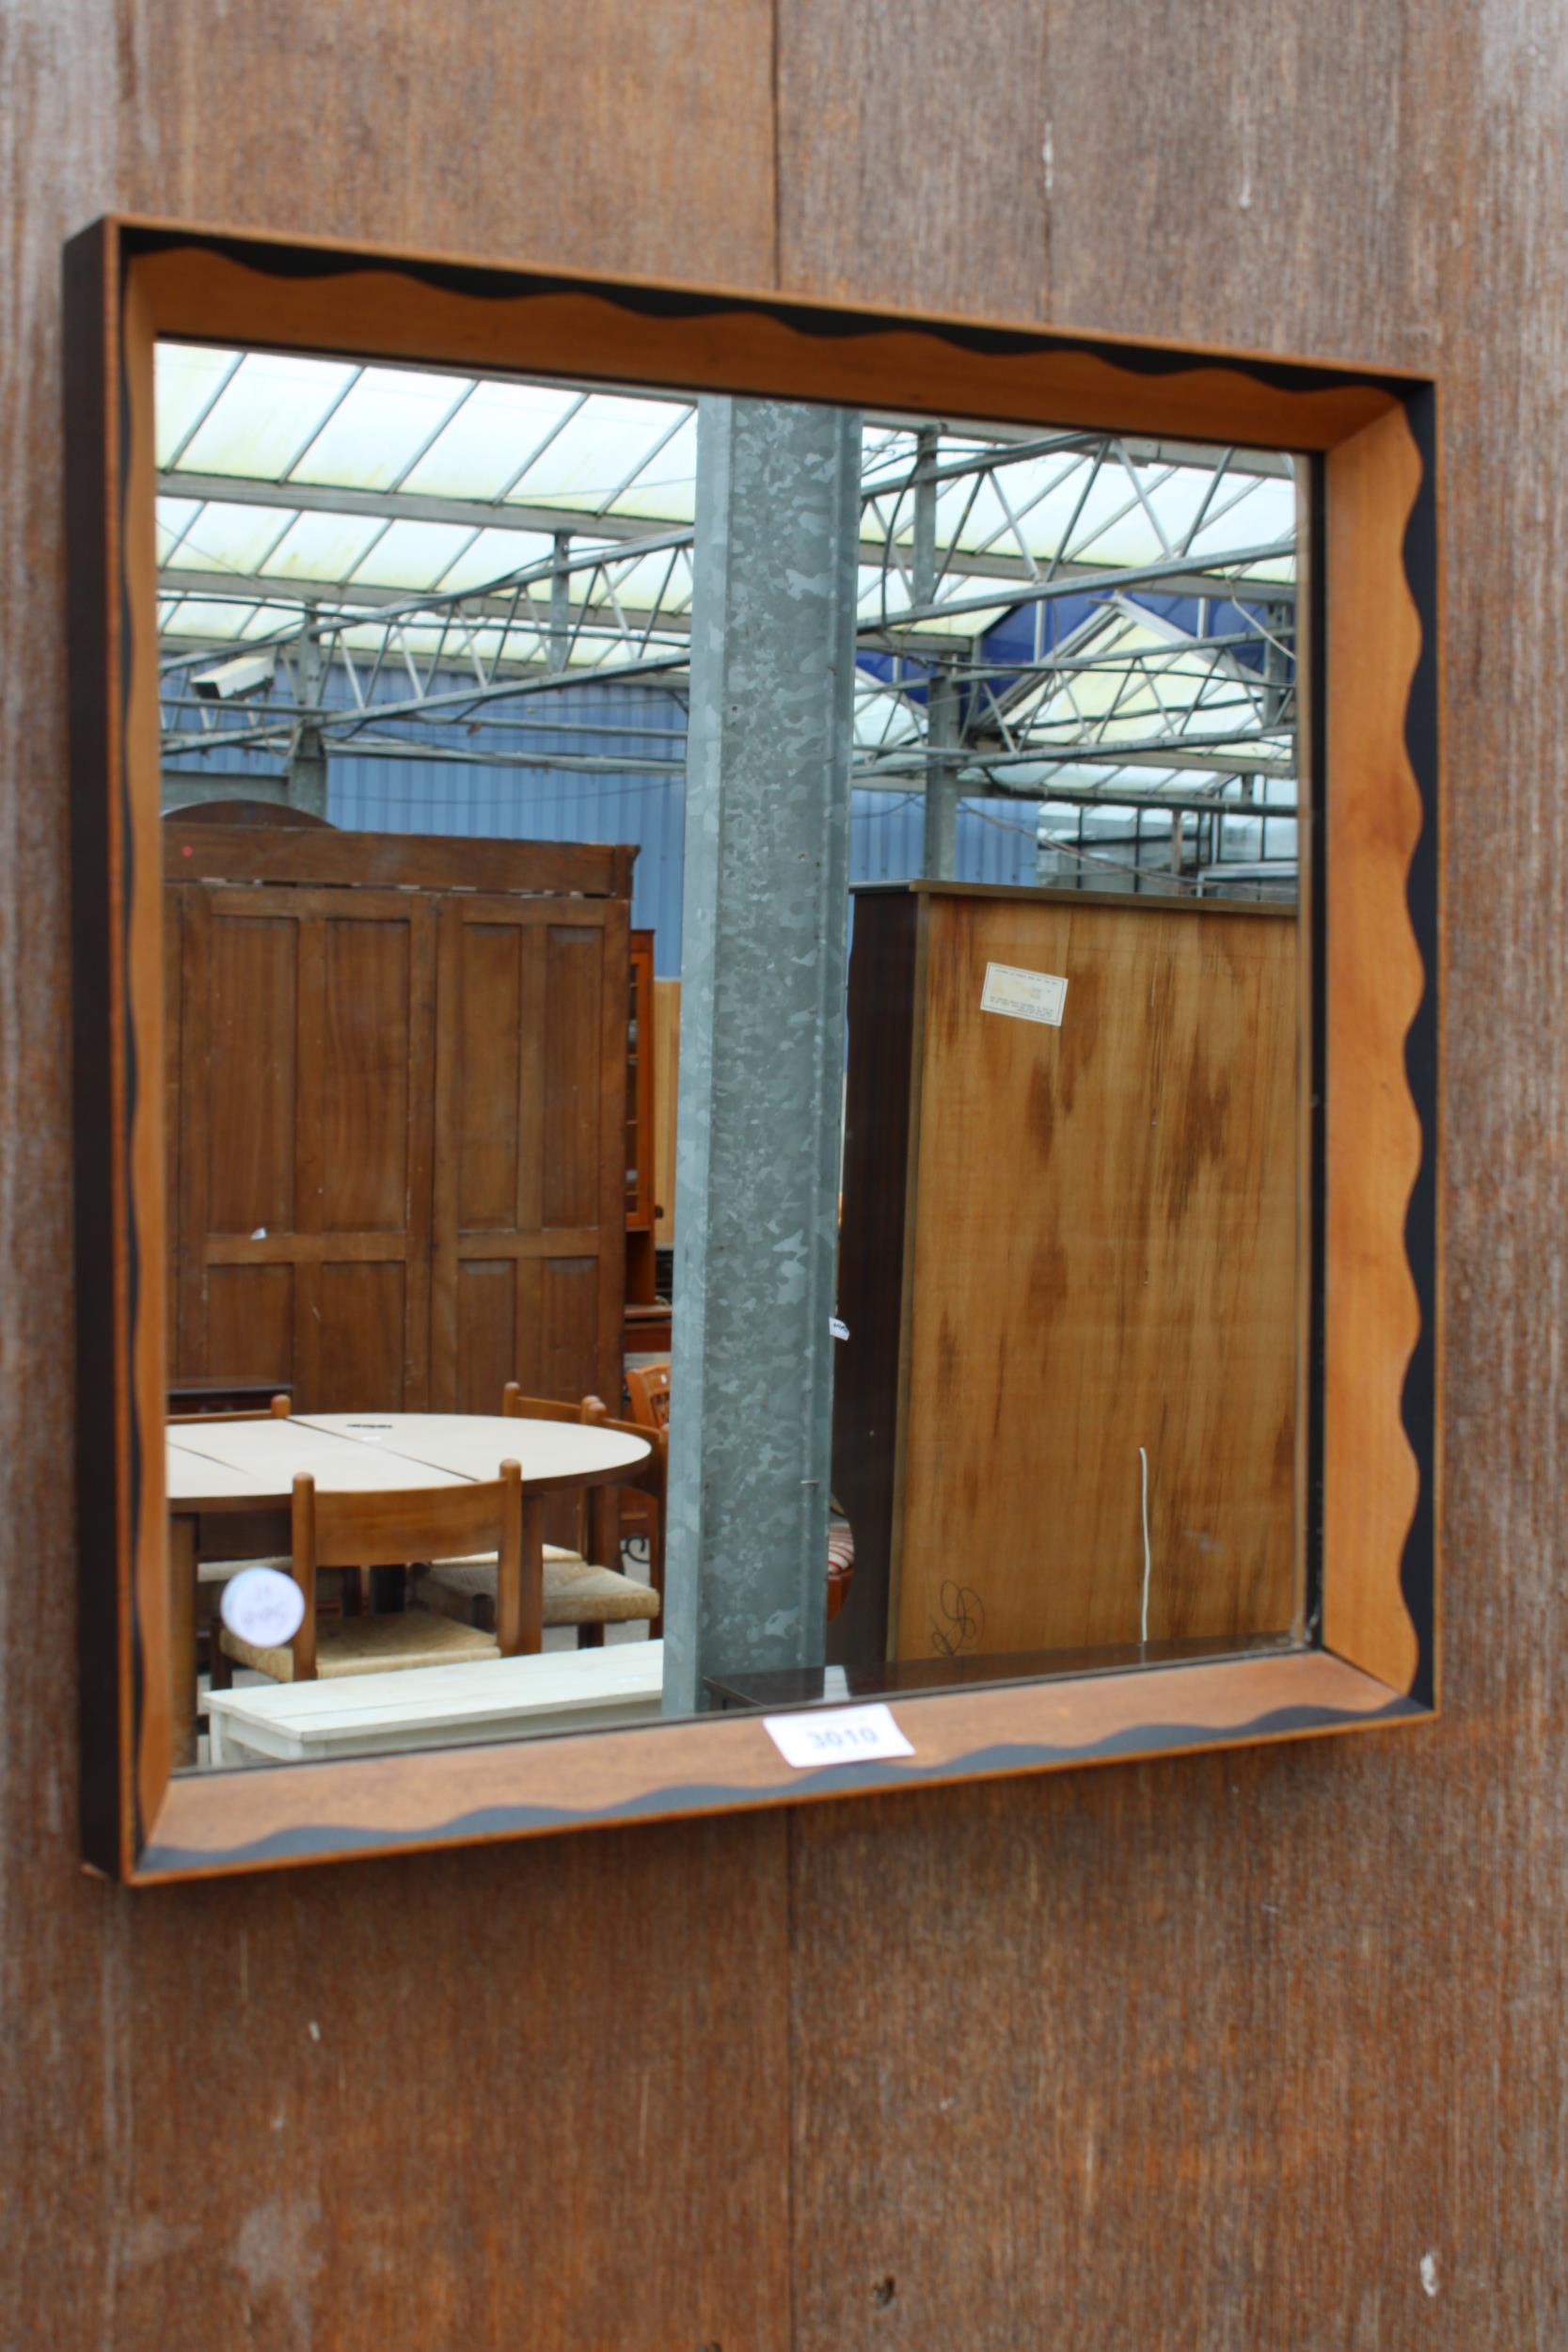 A WALL MIRROR WITH BLACK PAINTED DECORATION 16"SQUARE